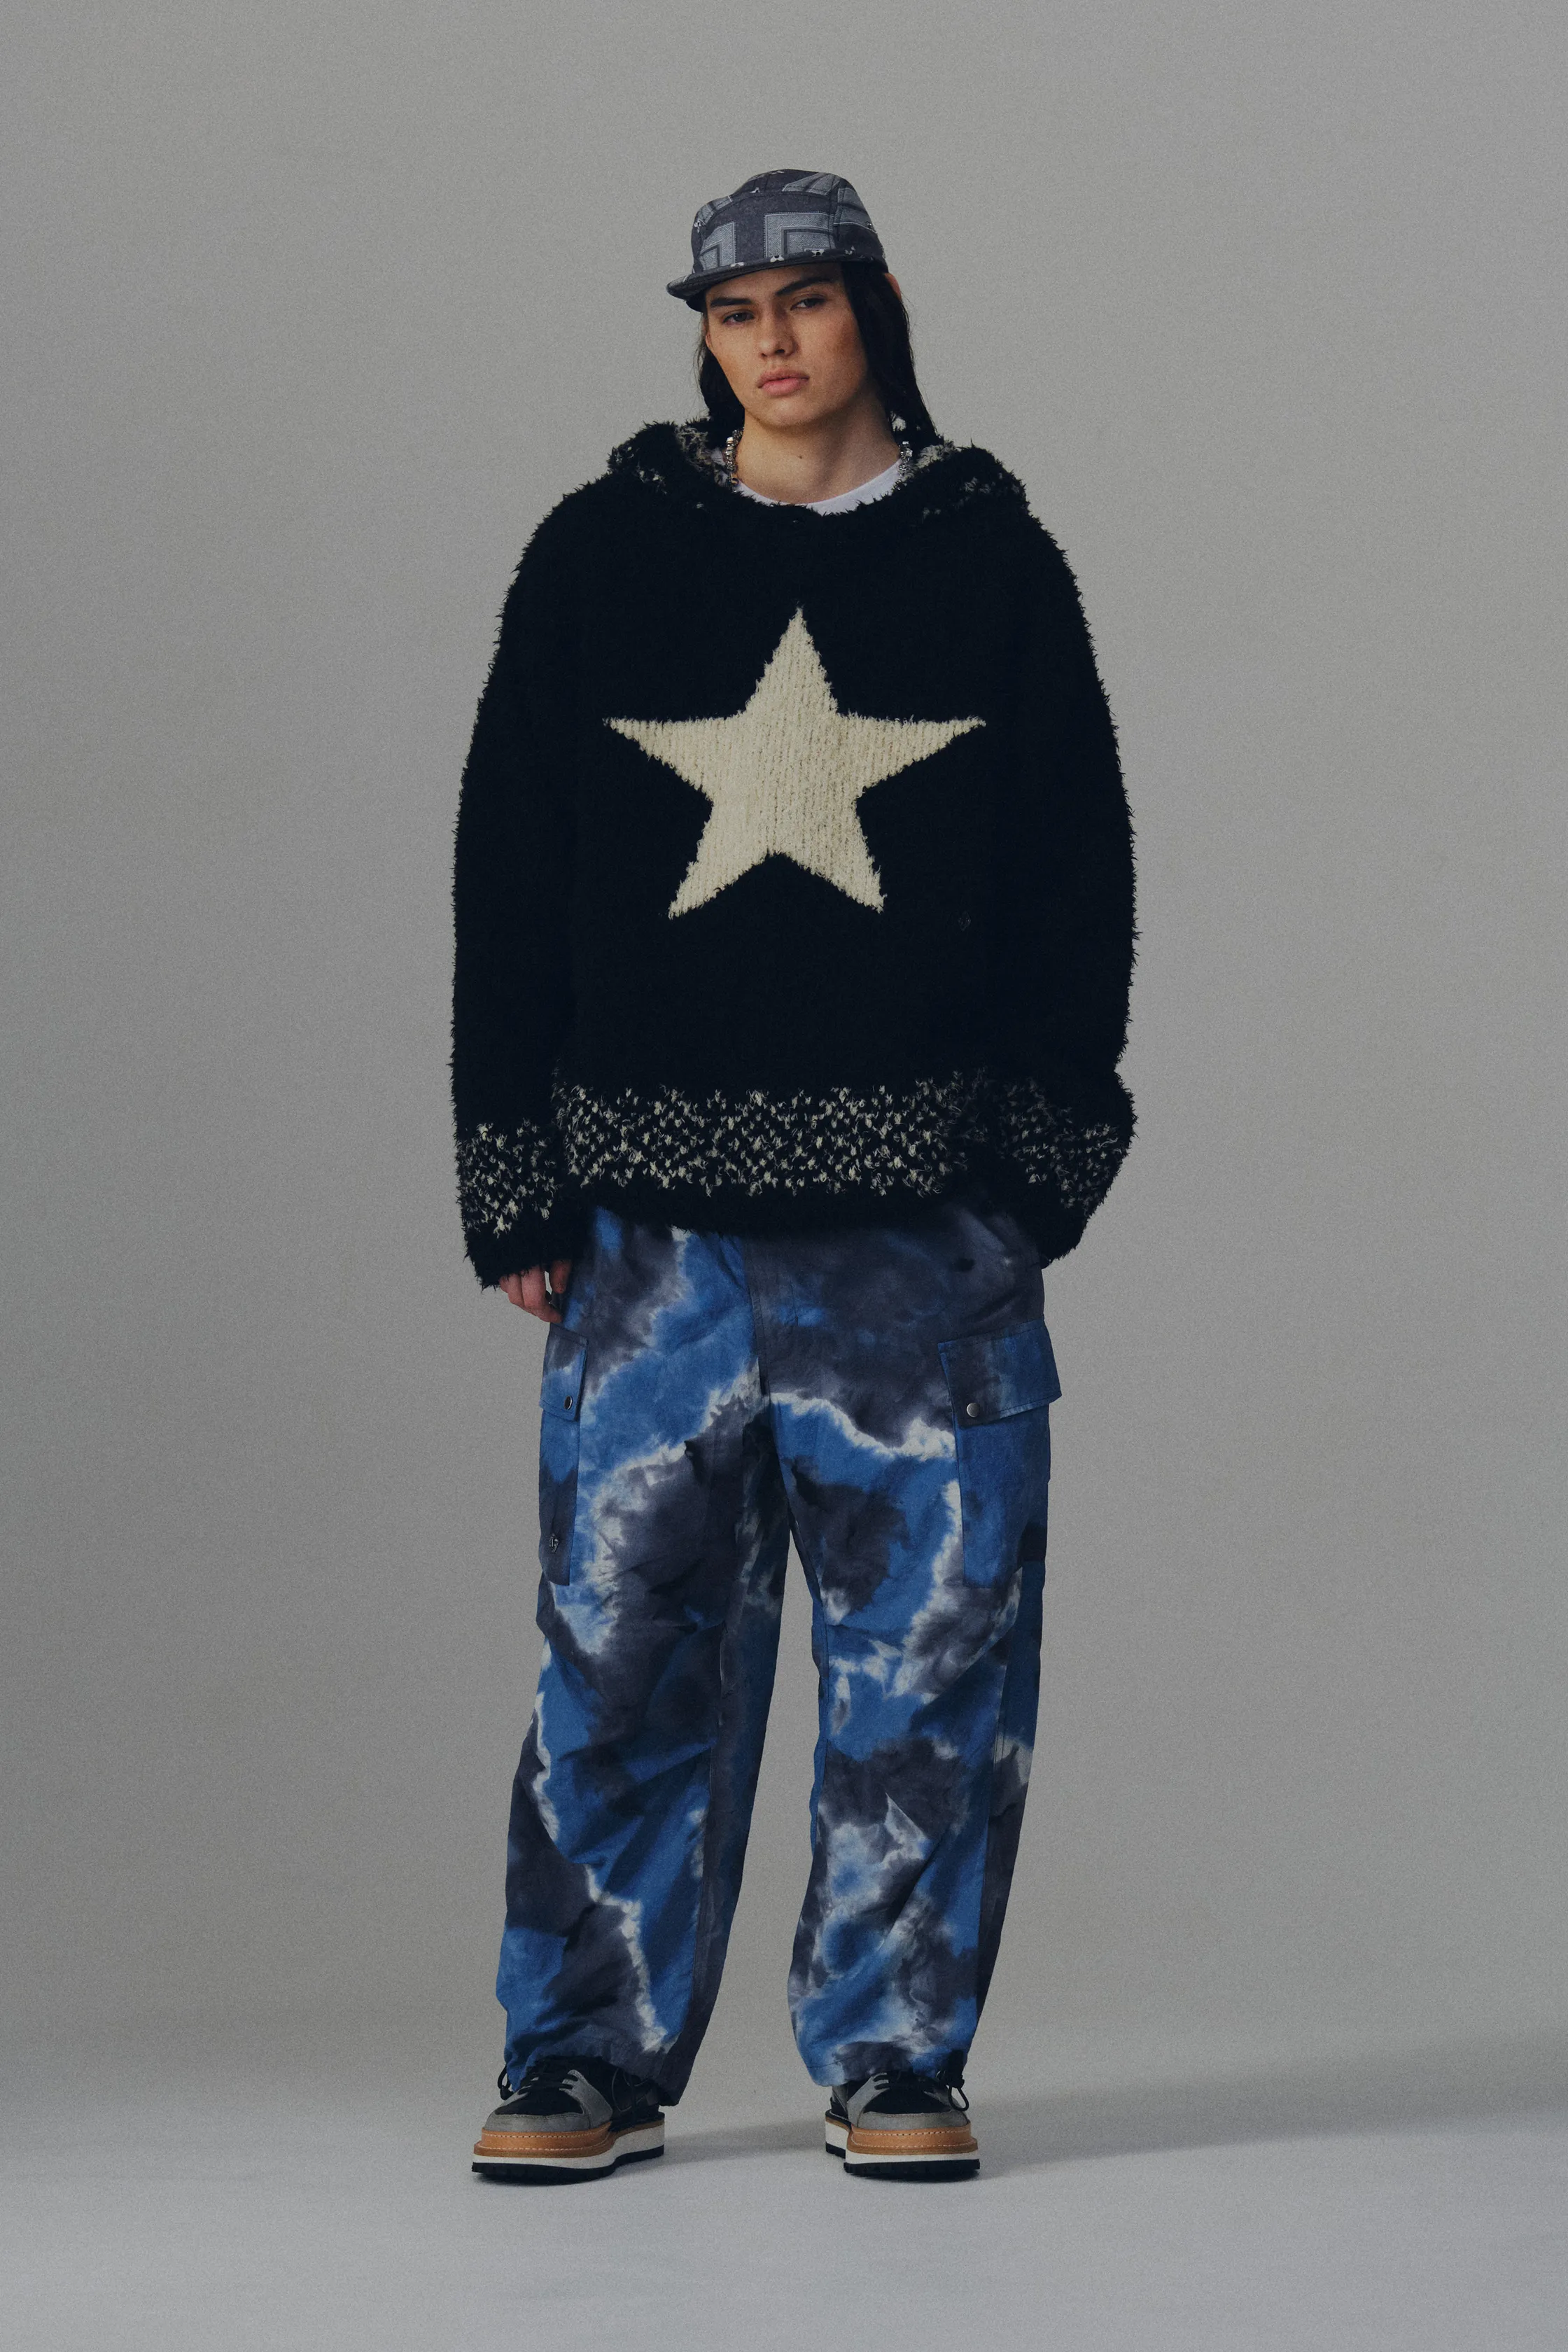 00017-Children-of-the-Discordance-Mens-Fall-22-credit-brand.png